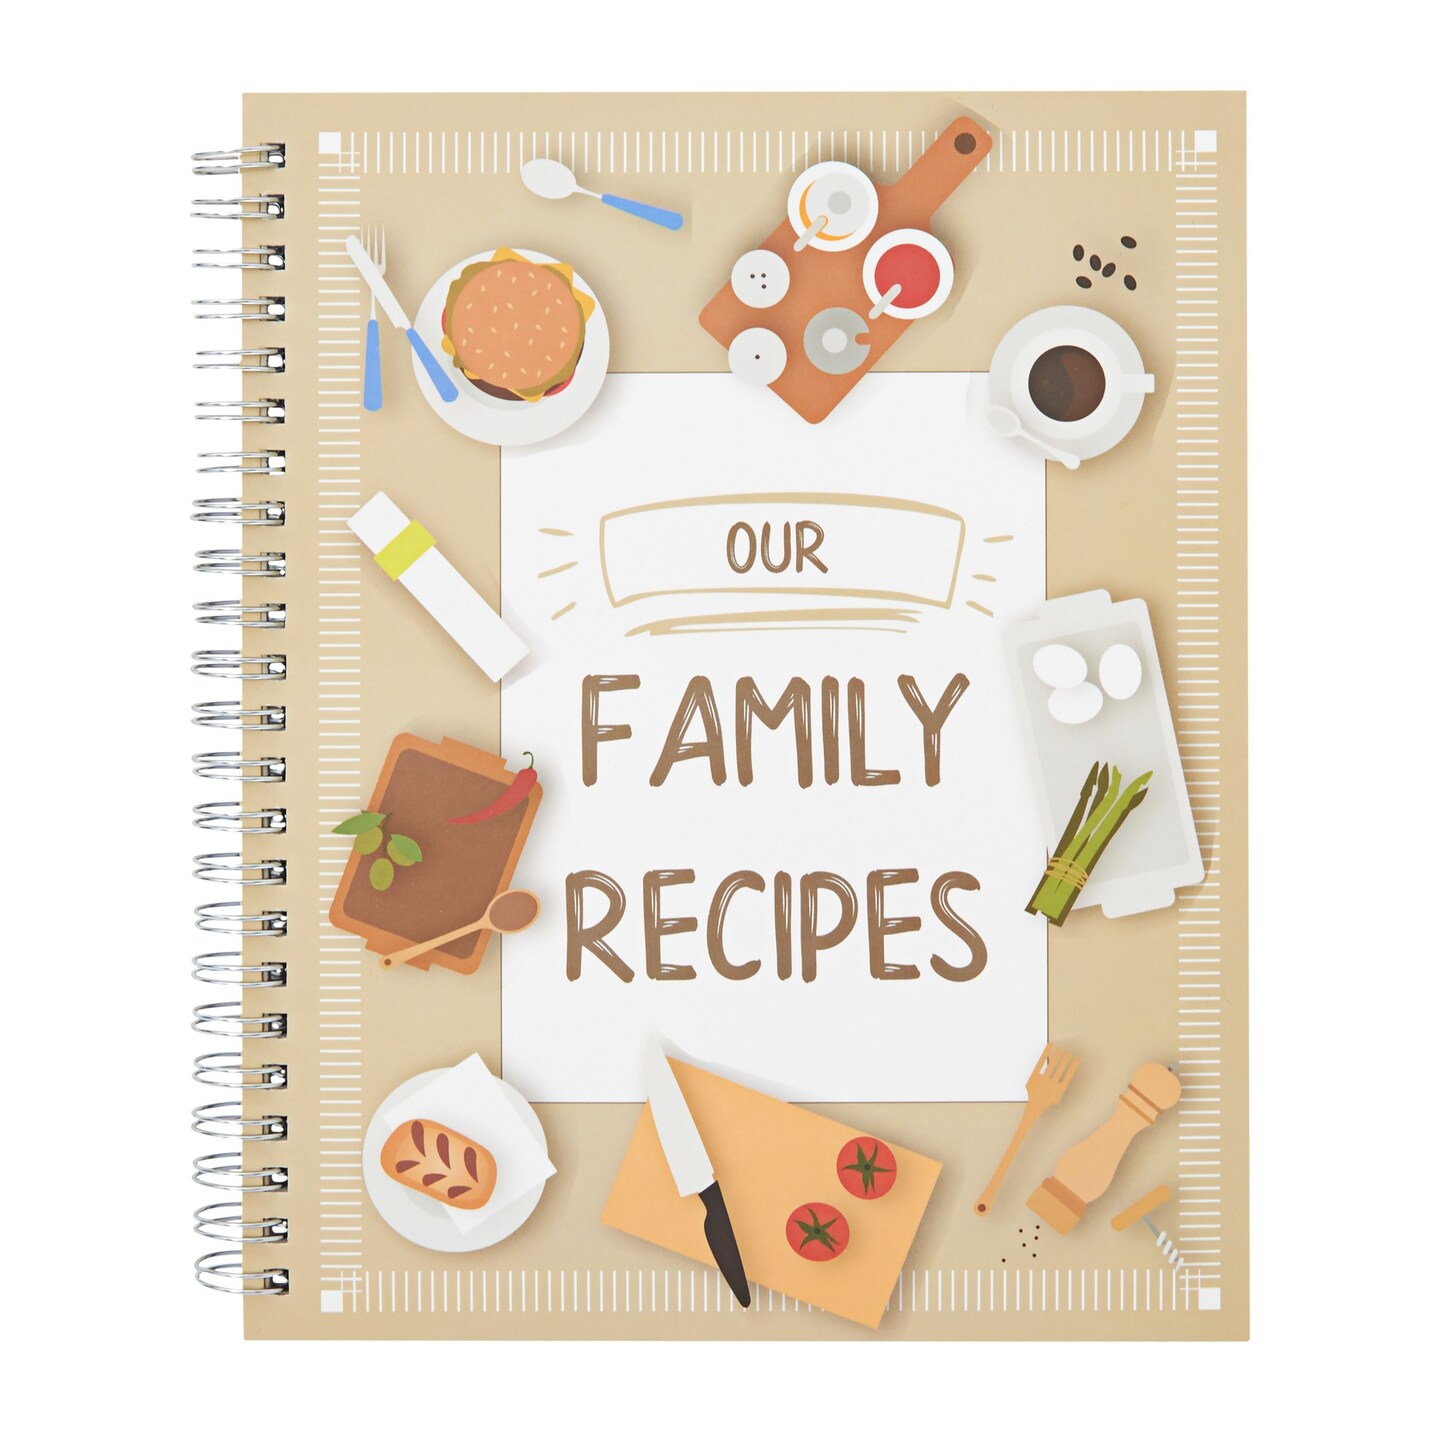 Blank Family Recipe Book to Write In, Spiral Bound DIY Make Your Own Cookbook, 90 Pages (6.5 x 8.2 In)